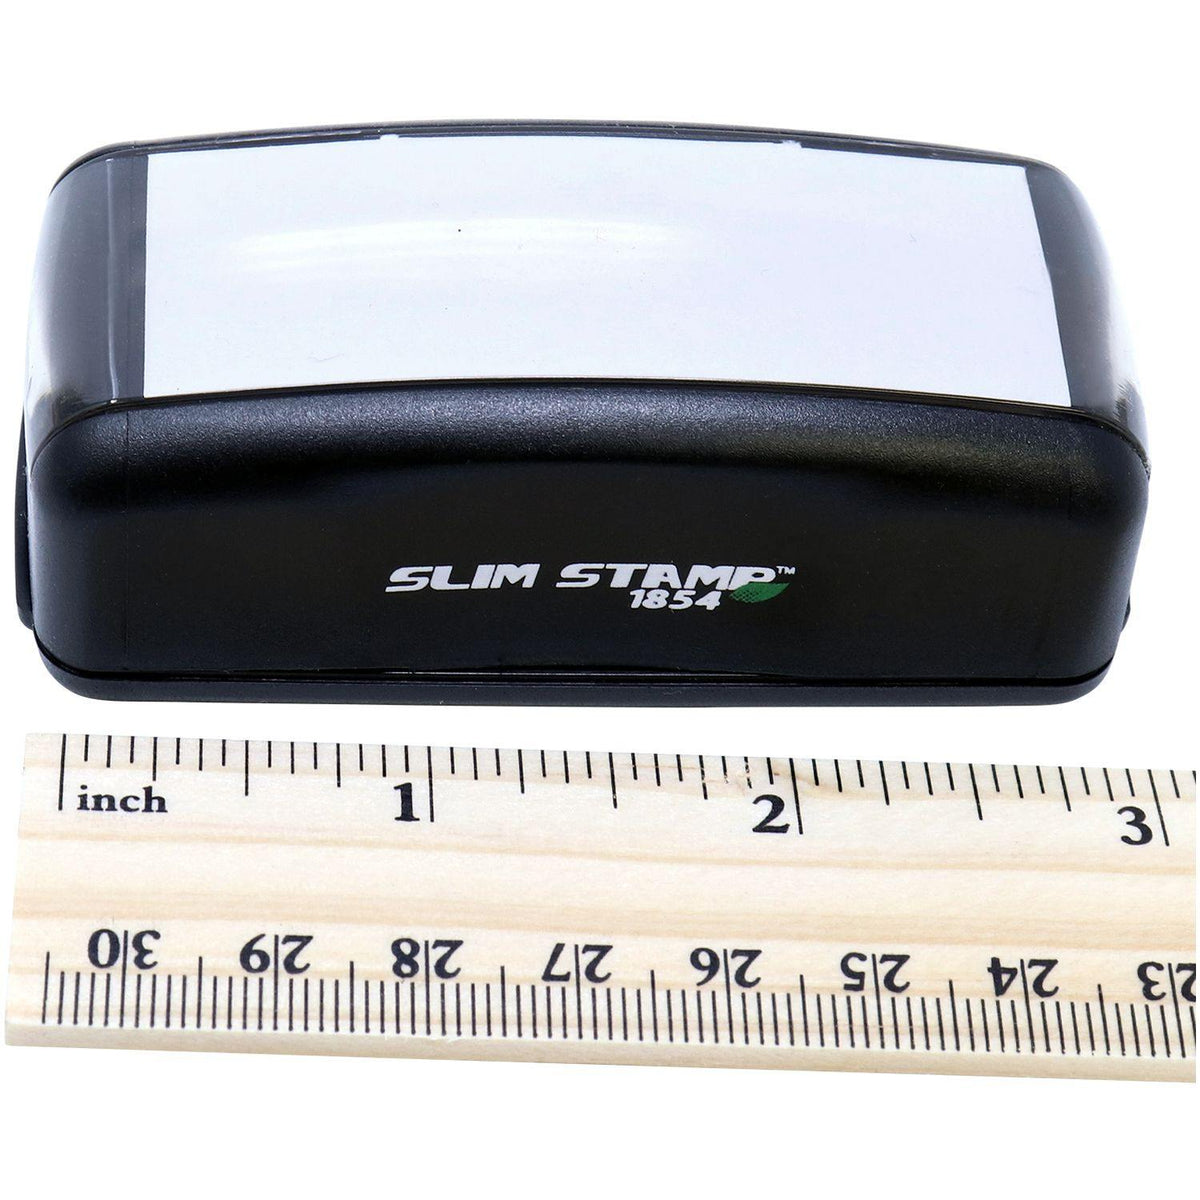 Measurement Large Pre-Inked Bold Priority Stamp with Ruler